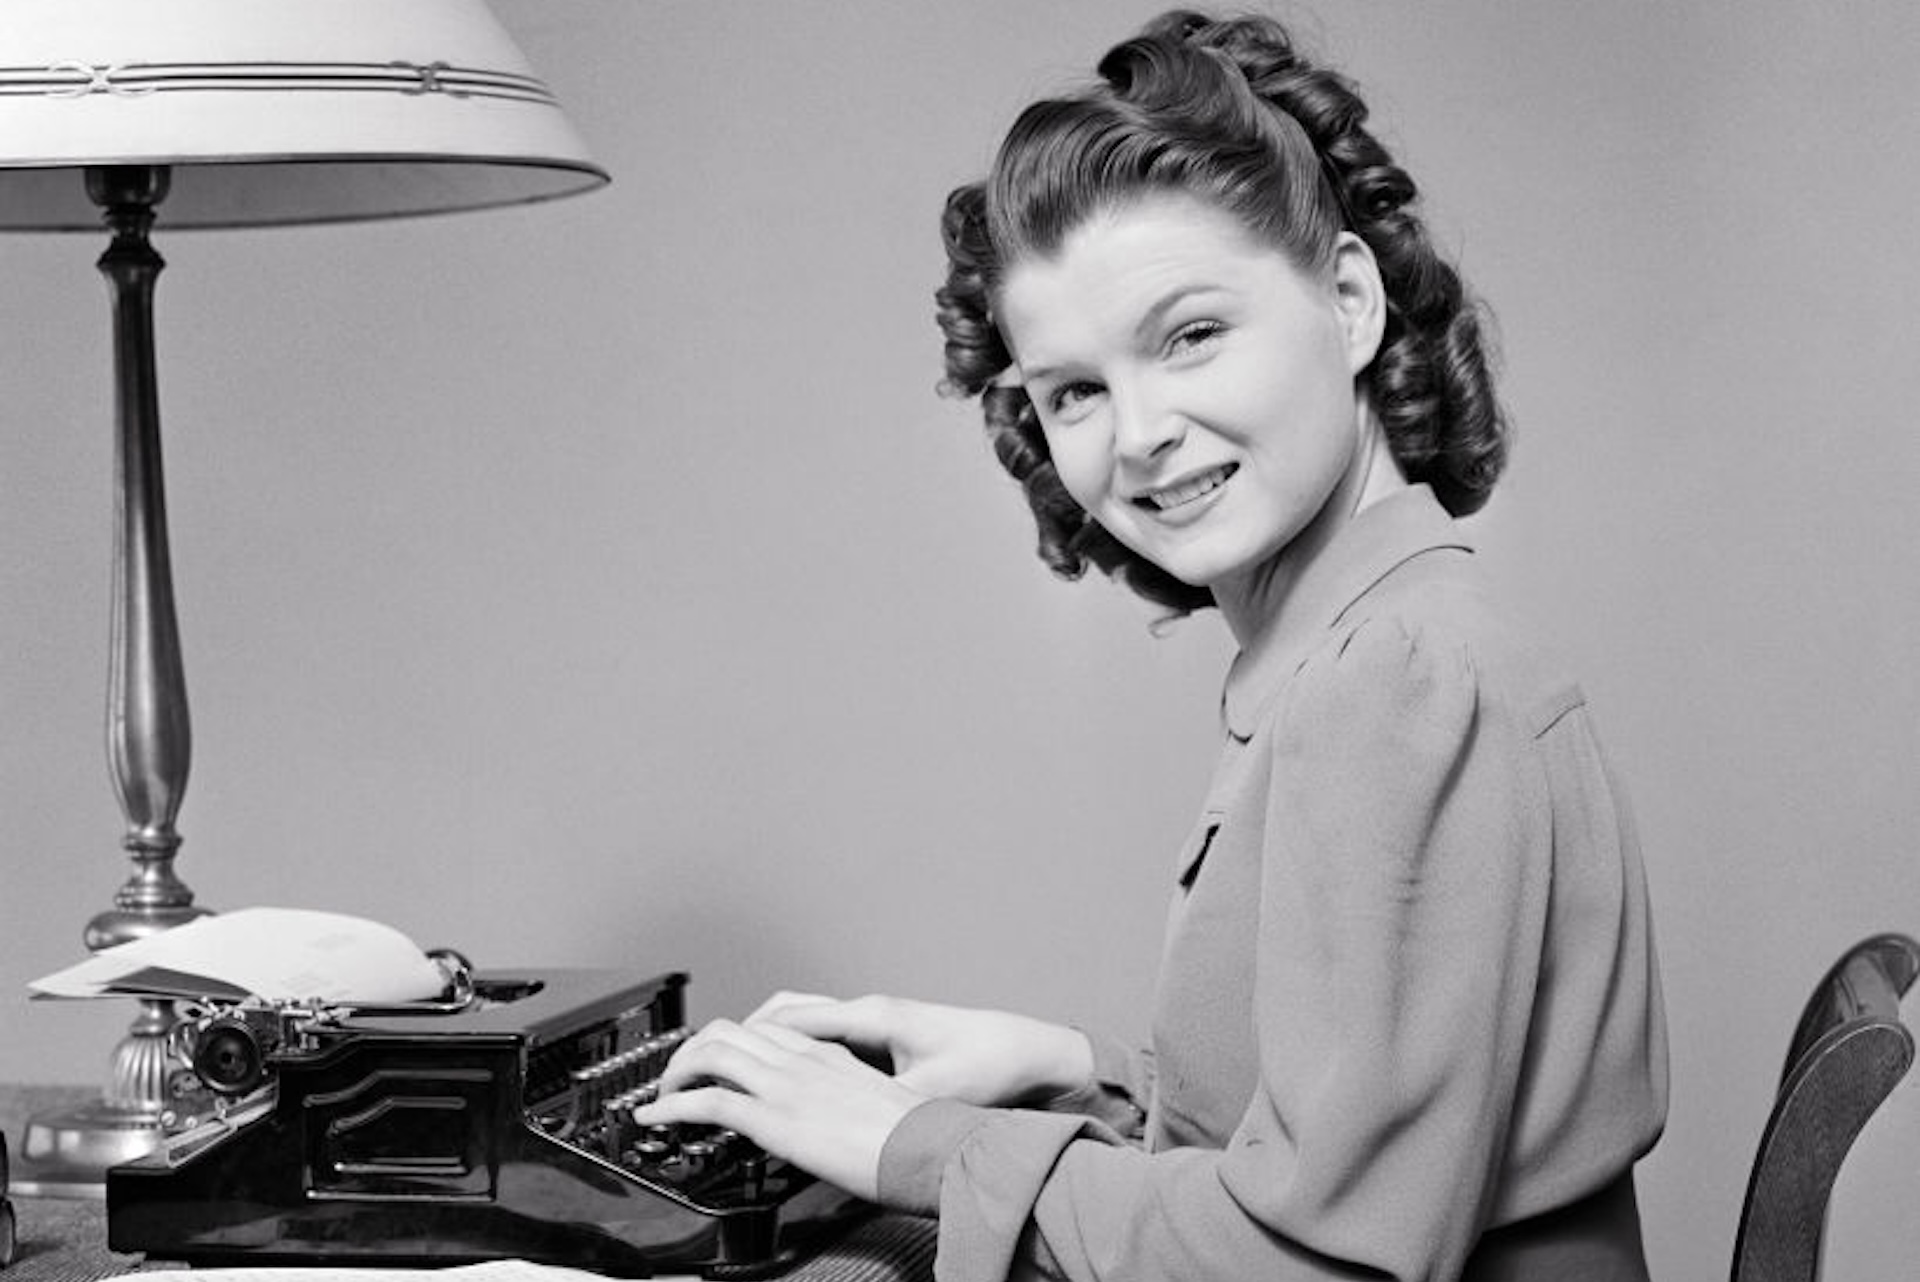 1940s Woman Seated At Home Desk Using Portable Typewriter Head Turned Looking At Camera Smiling.